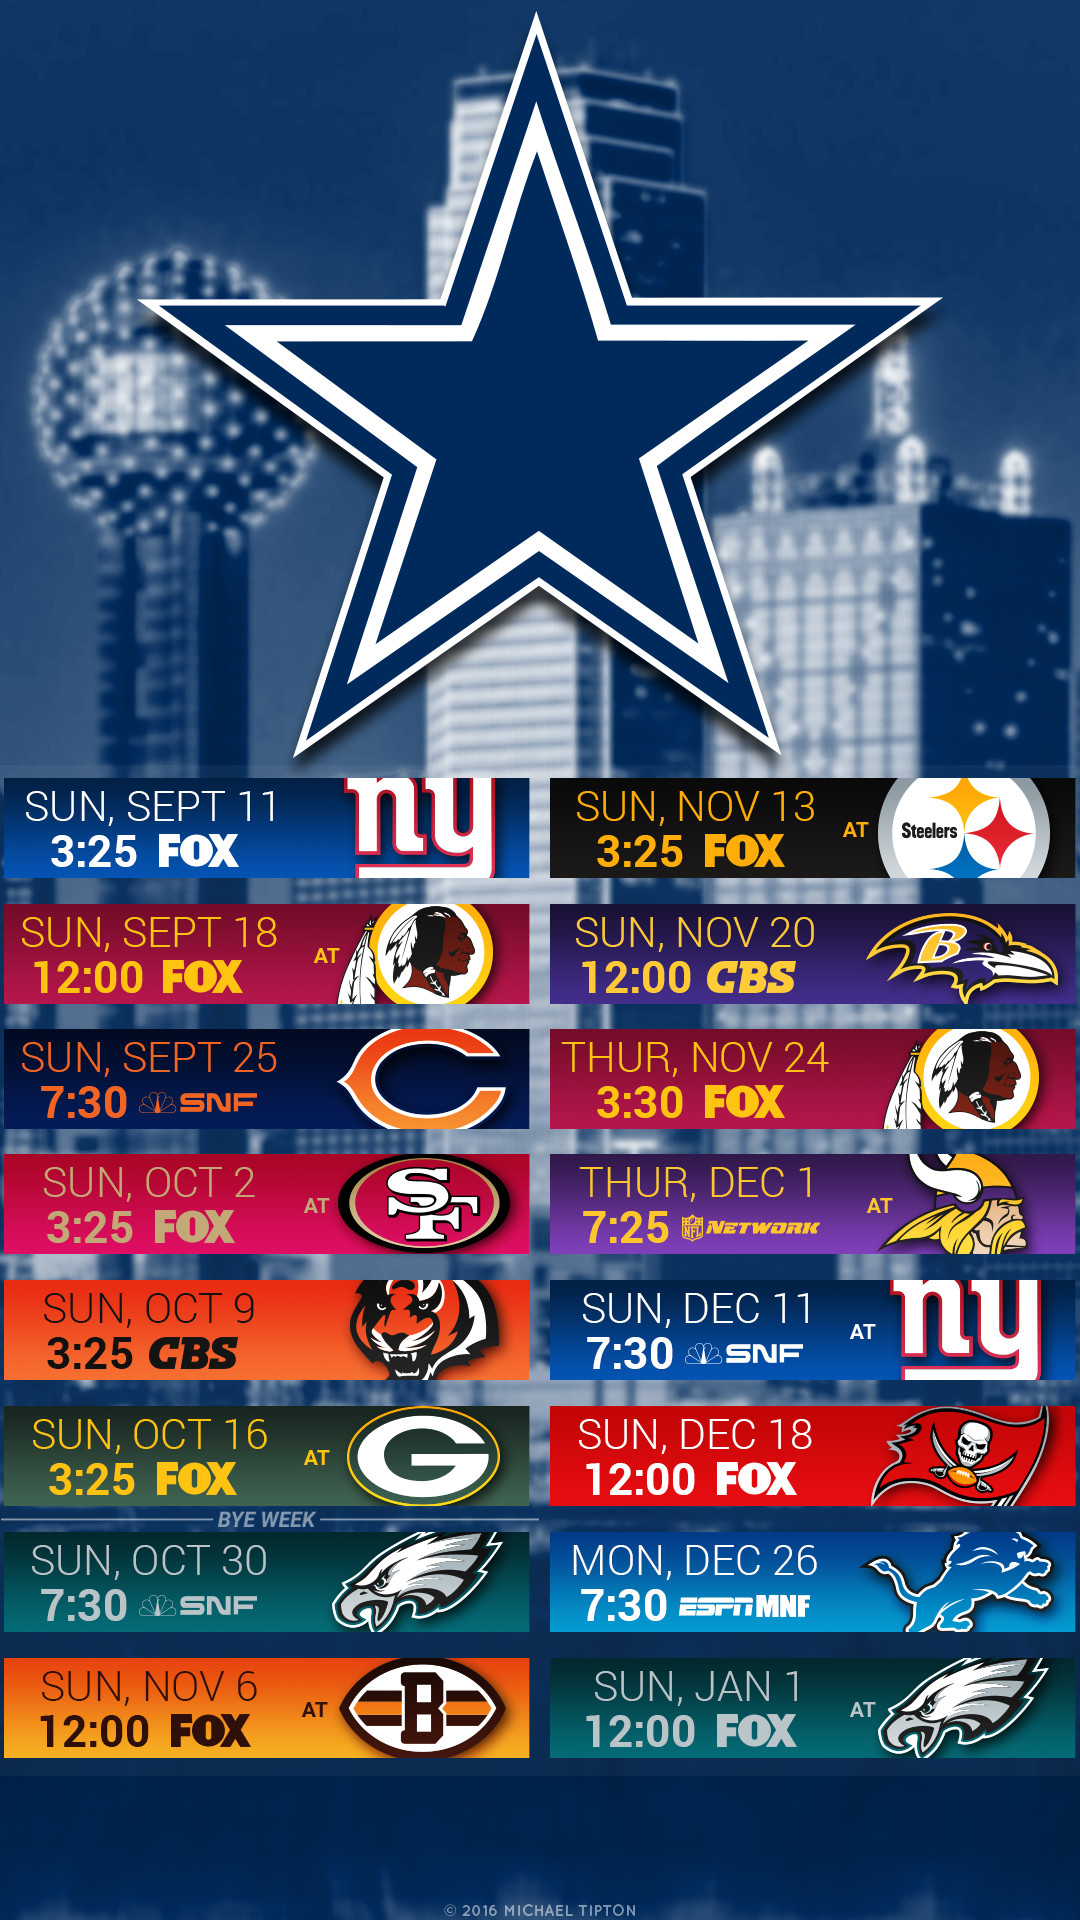 1080x1920 The Highest Quality Dallas Cowboys Football Schedule Wallpapers and Logo  Backgrounds for iPhone, Andriod, Galaxy, and Desktop PC.